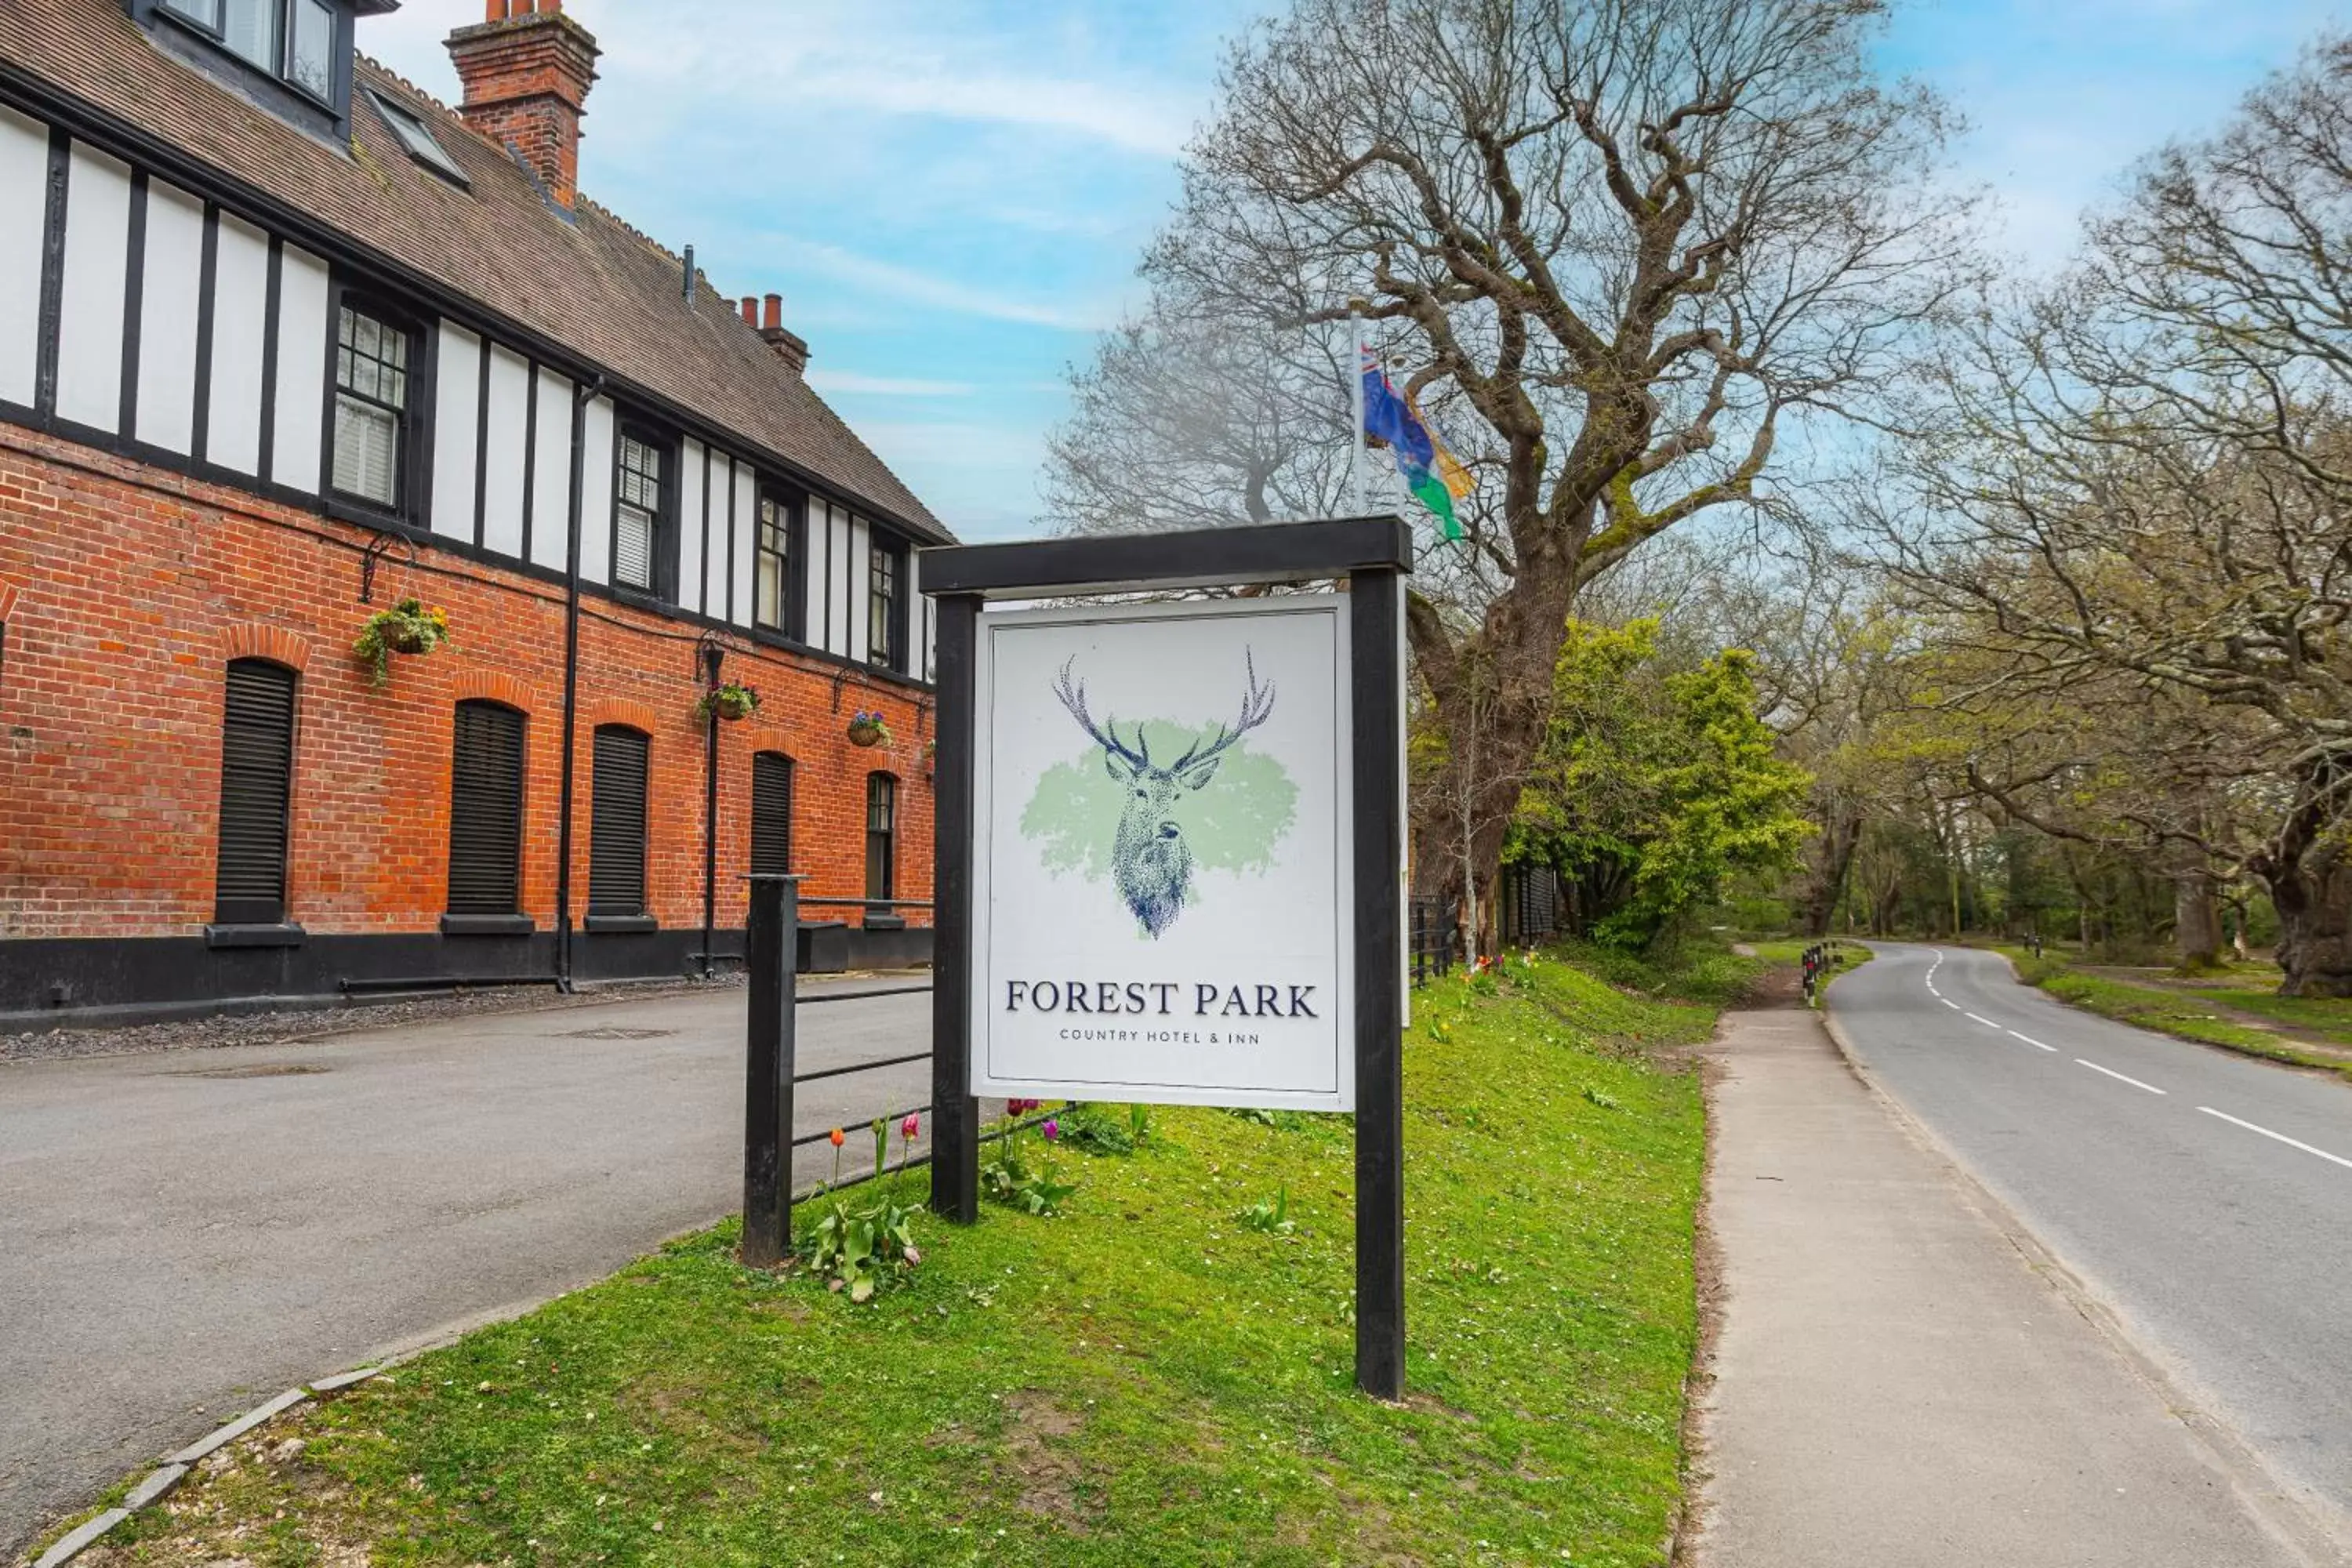 Property logo or sign, Property Building in Forest Park Country Hotel & Inn, Brockenhurst, New Forest, Hampshire